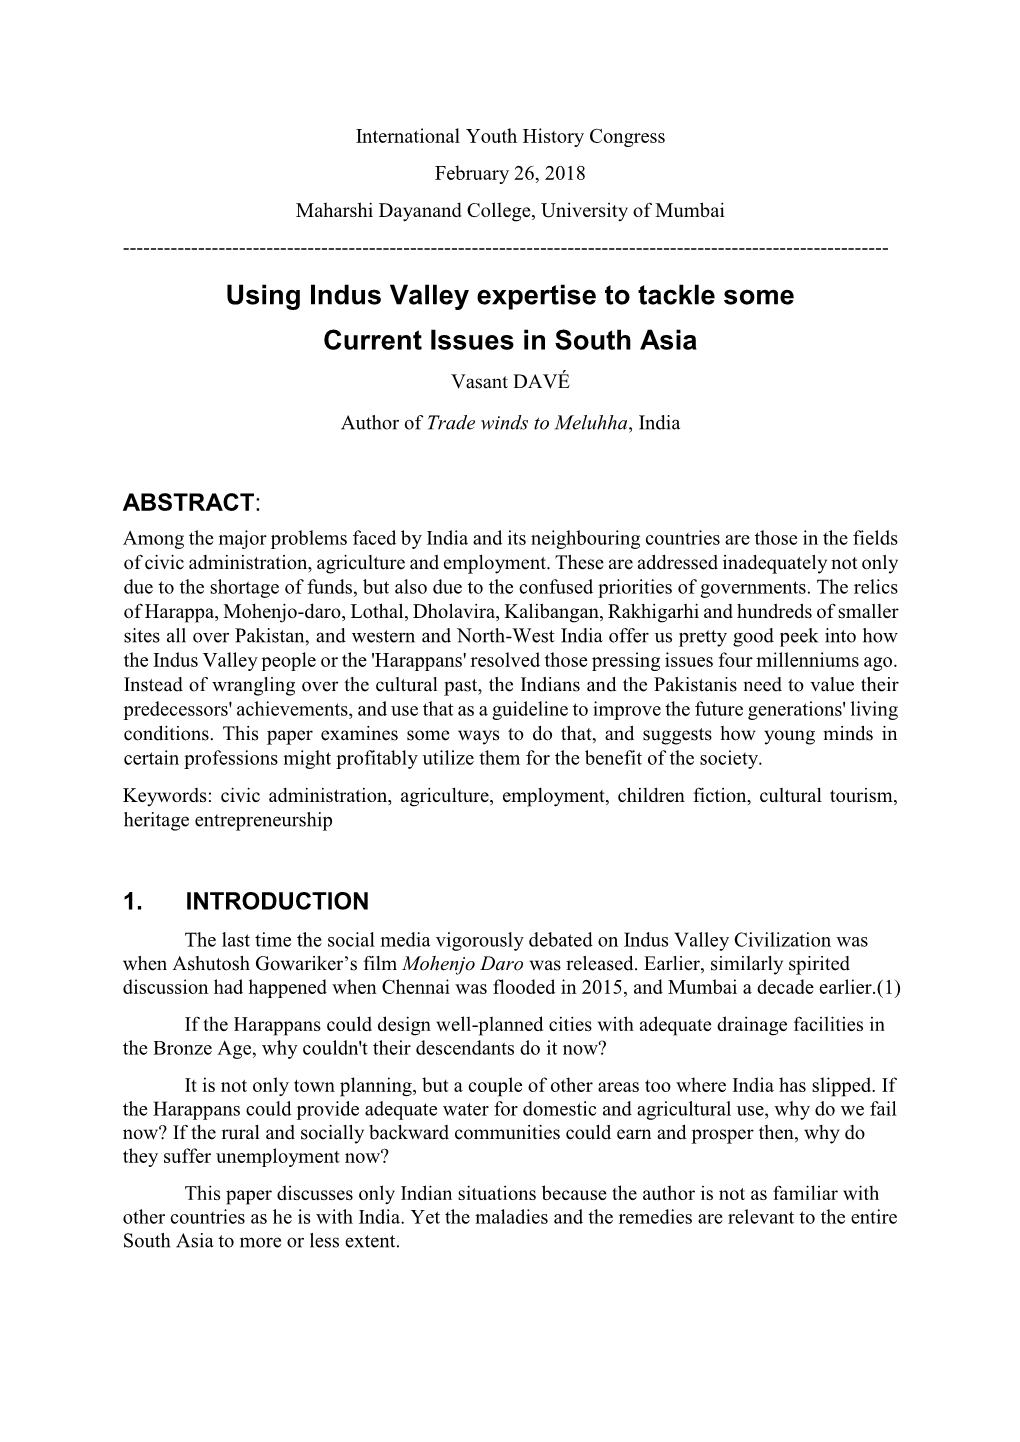 Using Indus Valley Expertise to Tackle Some Current Issues in South Asia